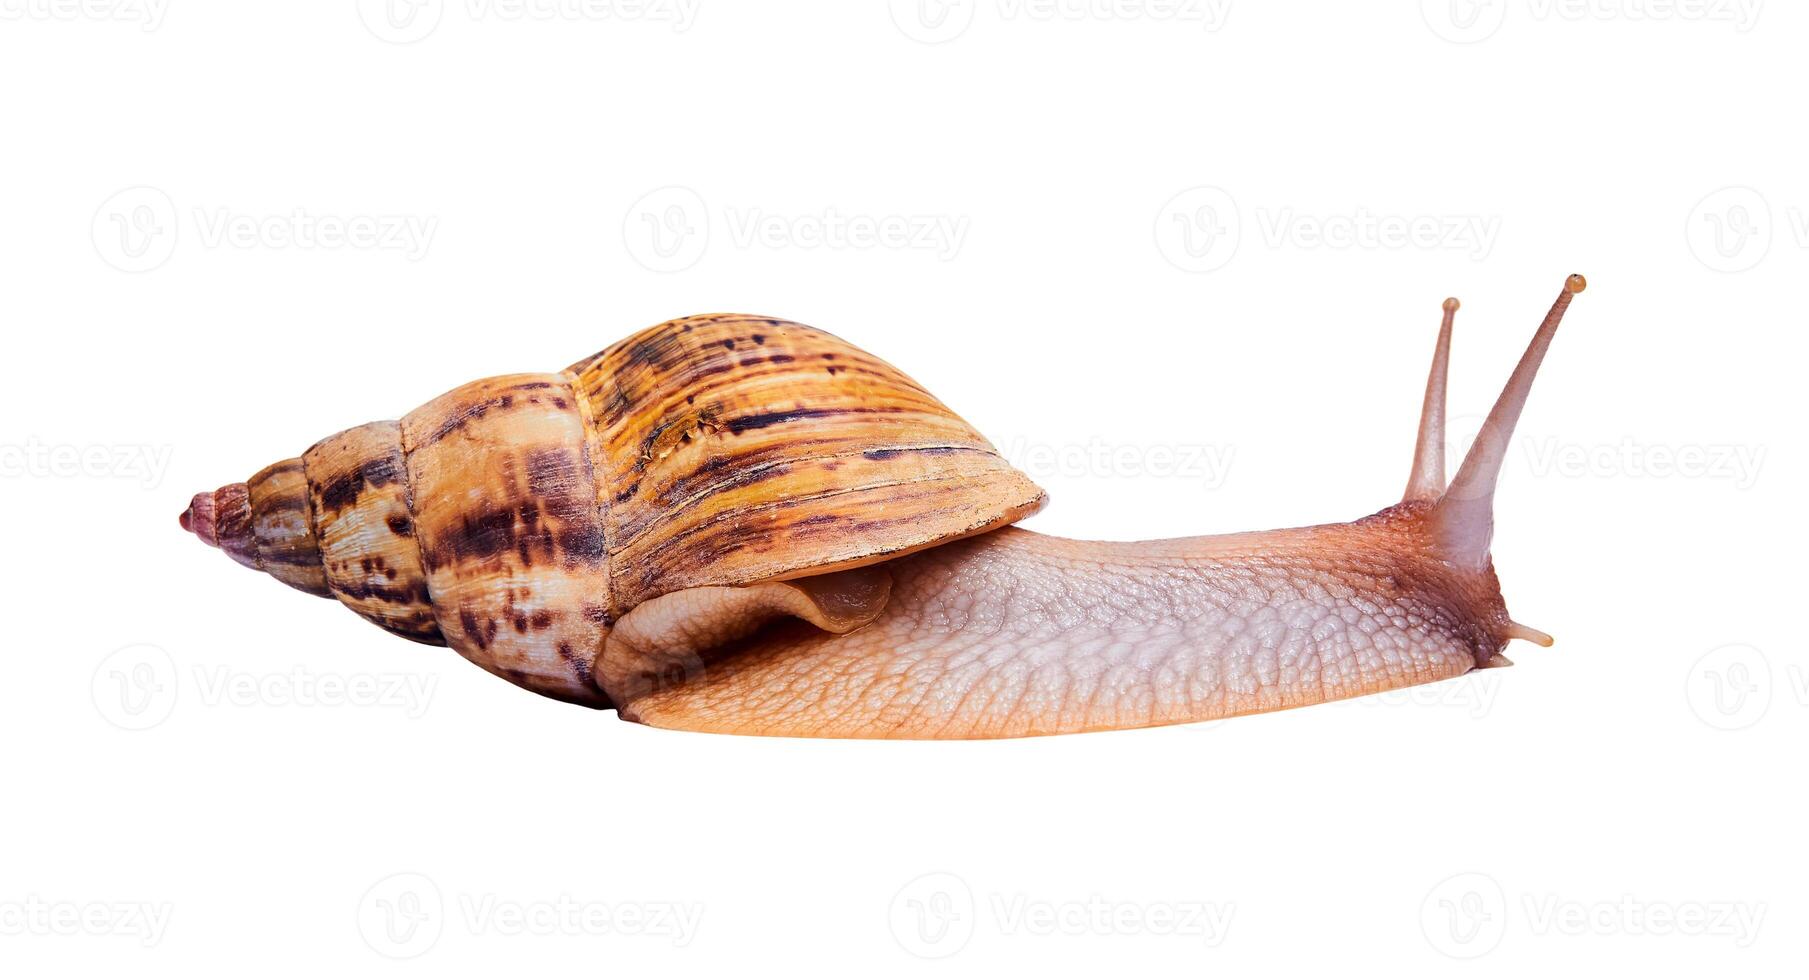 live snail achatina isolated on white background, side view photo